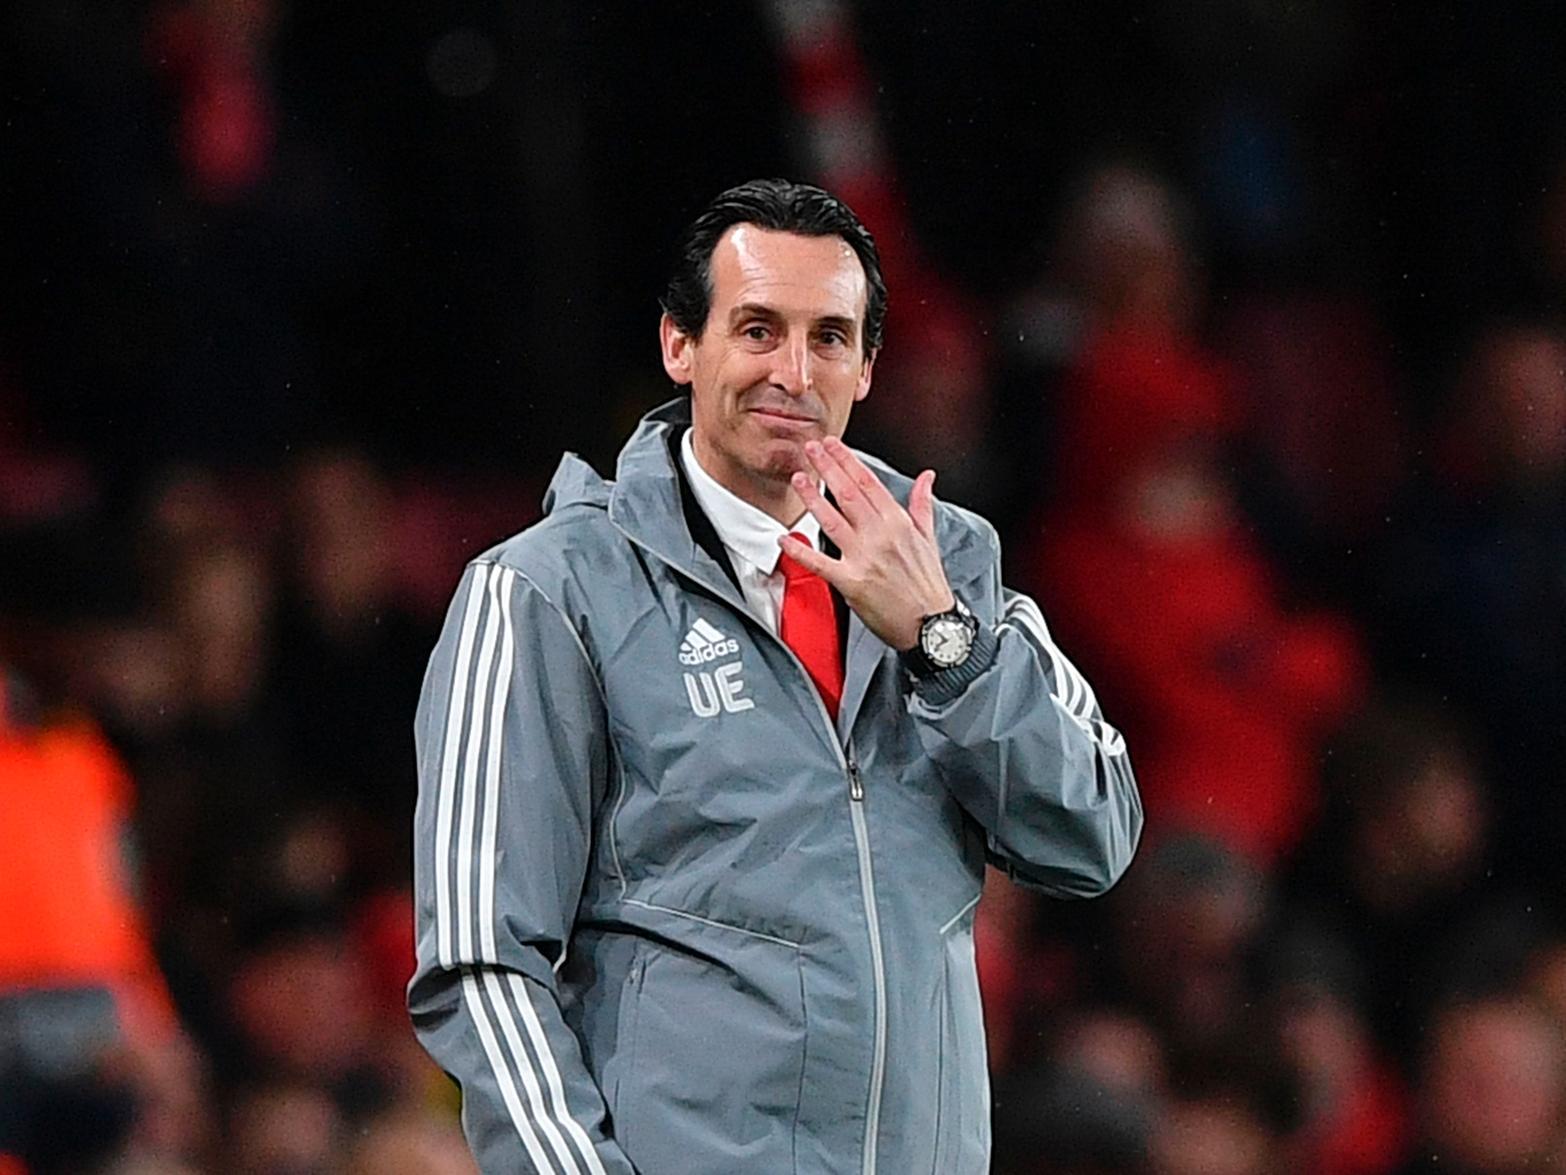 Arsenal have sacked under-performing manager Unai Emery and are set to face Norwich on Sunday. Playing at home, Daniel Farkes Canaries may fancy an upset.